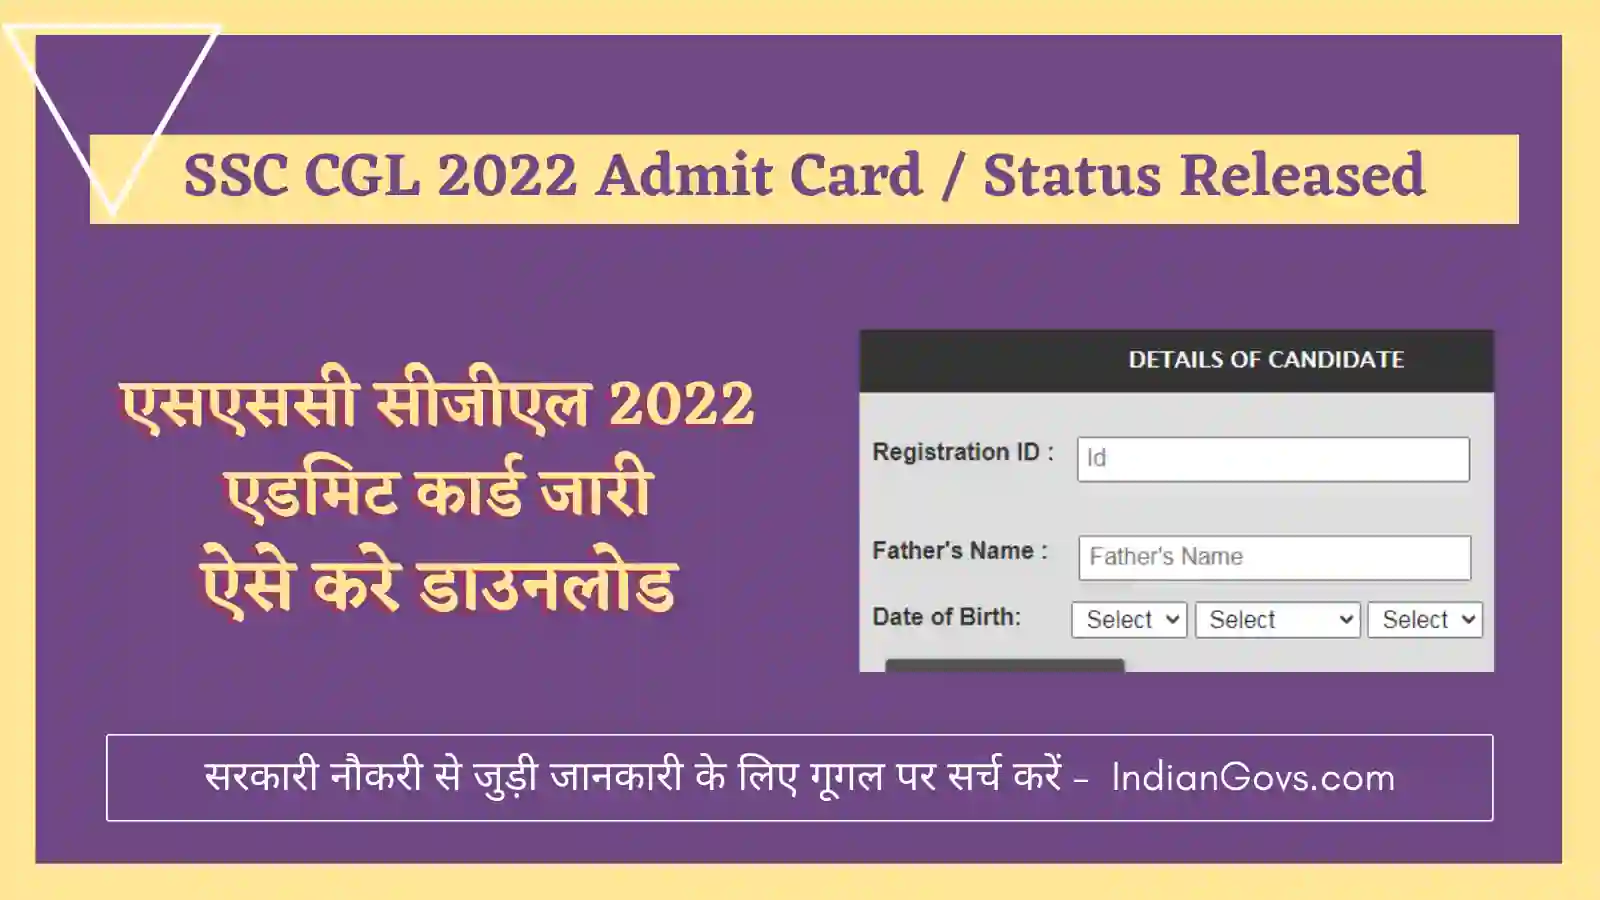 SSC CGL 2022 Admit Card / Status Released